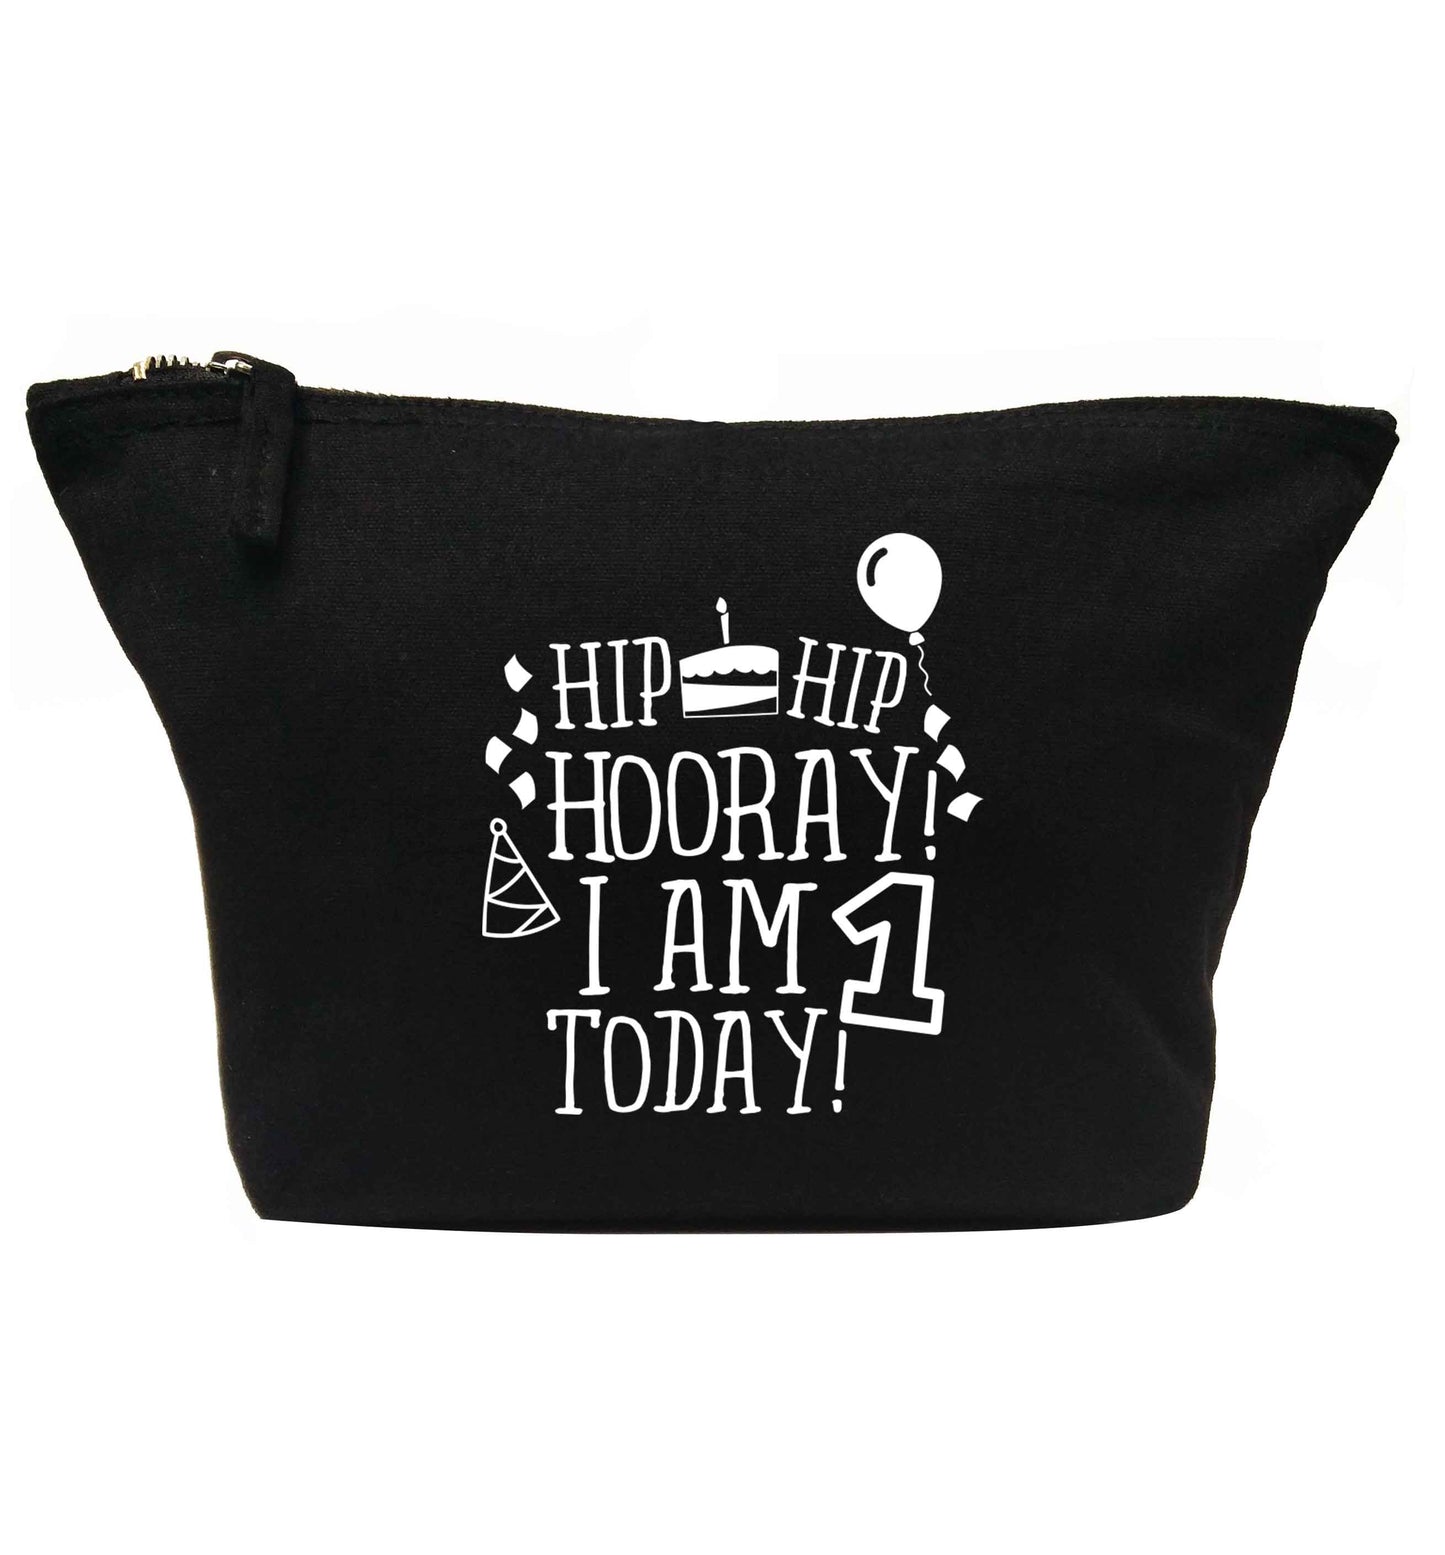 Hip Hip Hooray you're two today! | Makeup / wash bag